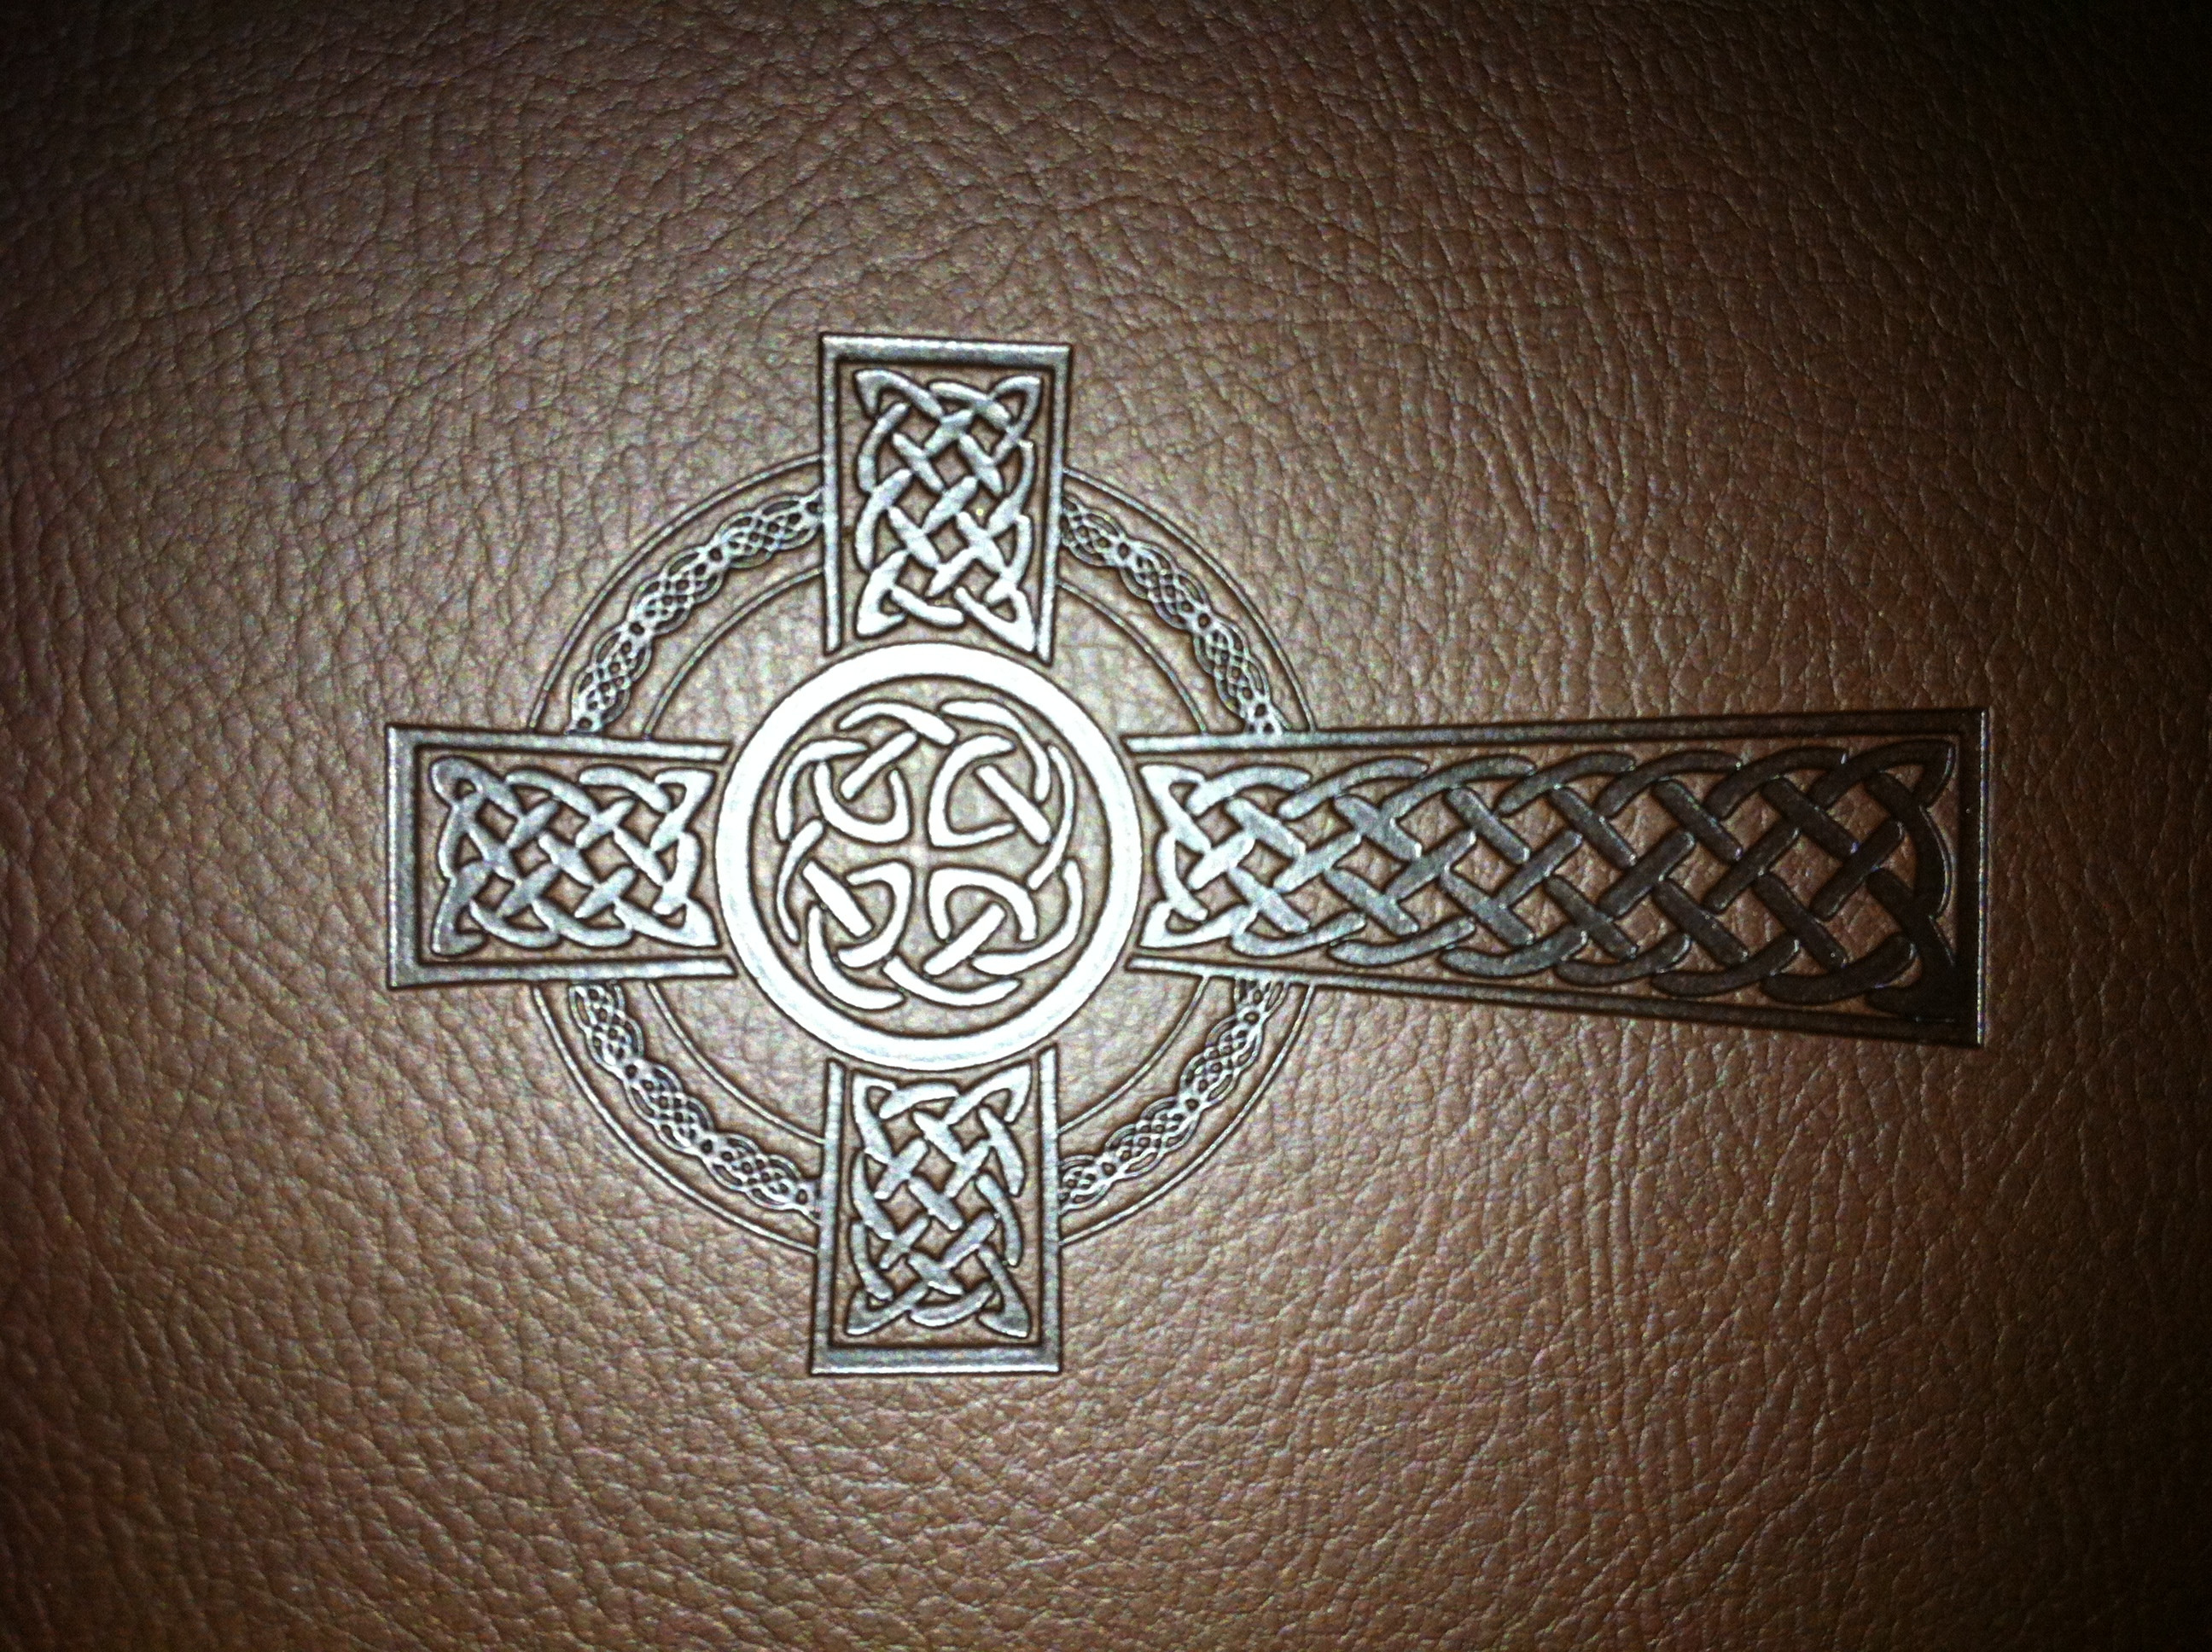 2592x1936 Celtic Cross on my Bible Cover. My Mother was Campbell of Argyll Highlands  of Scotland